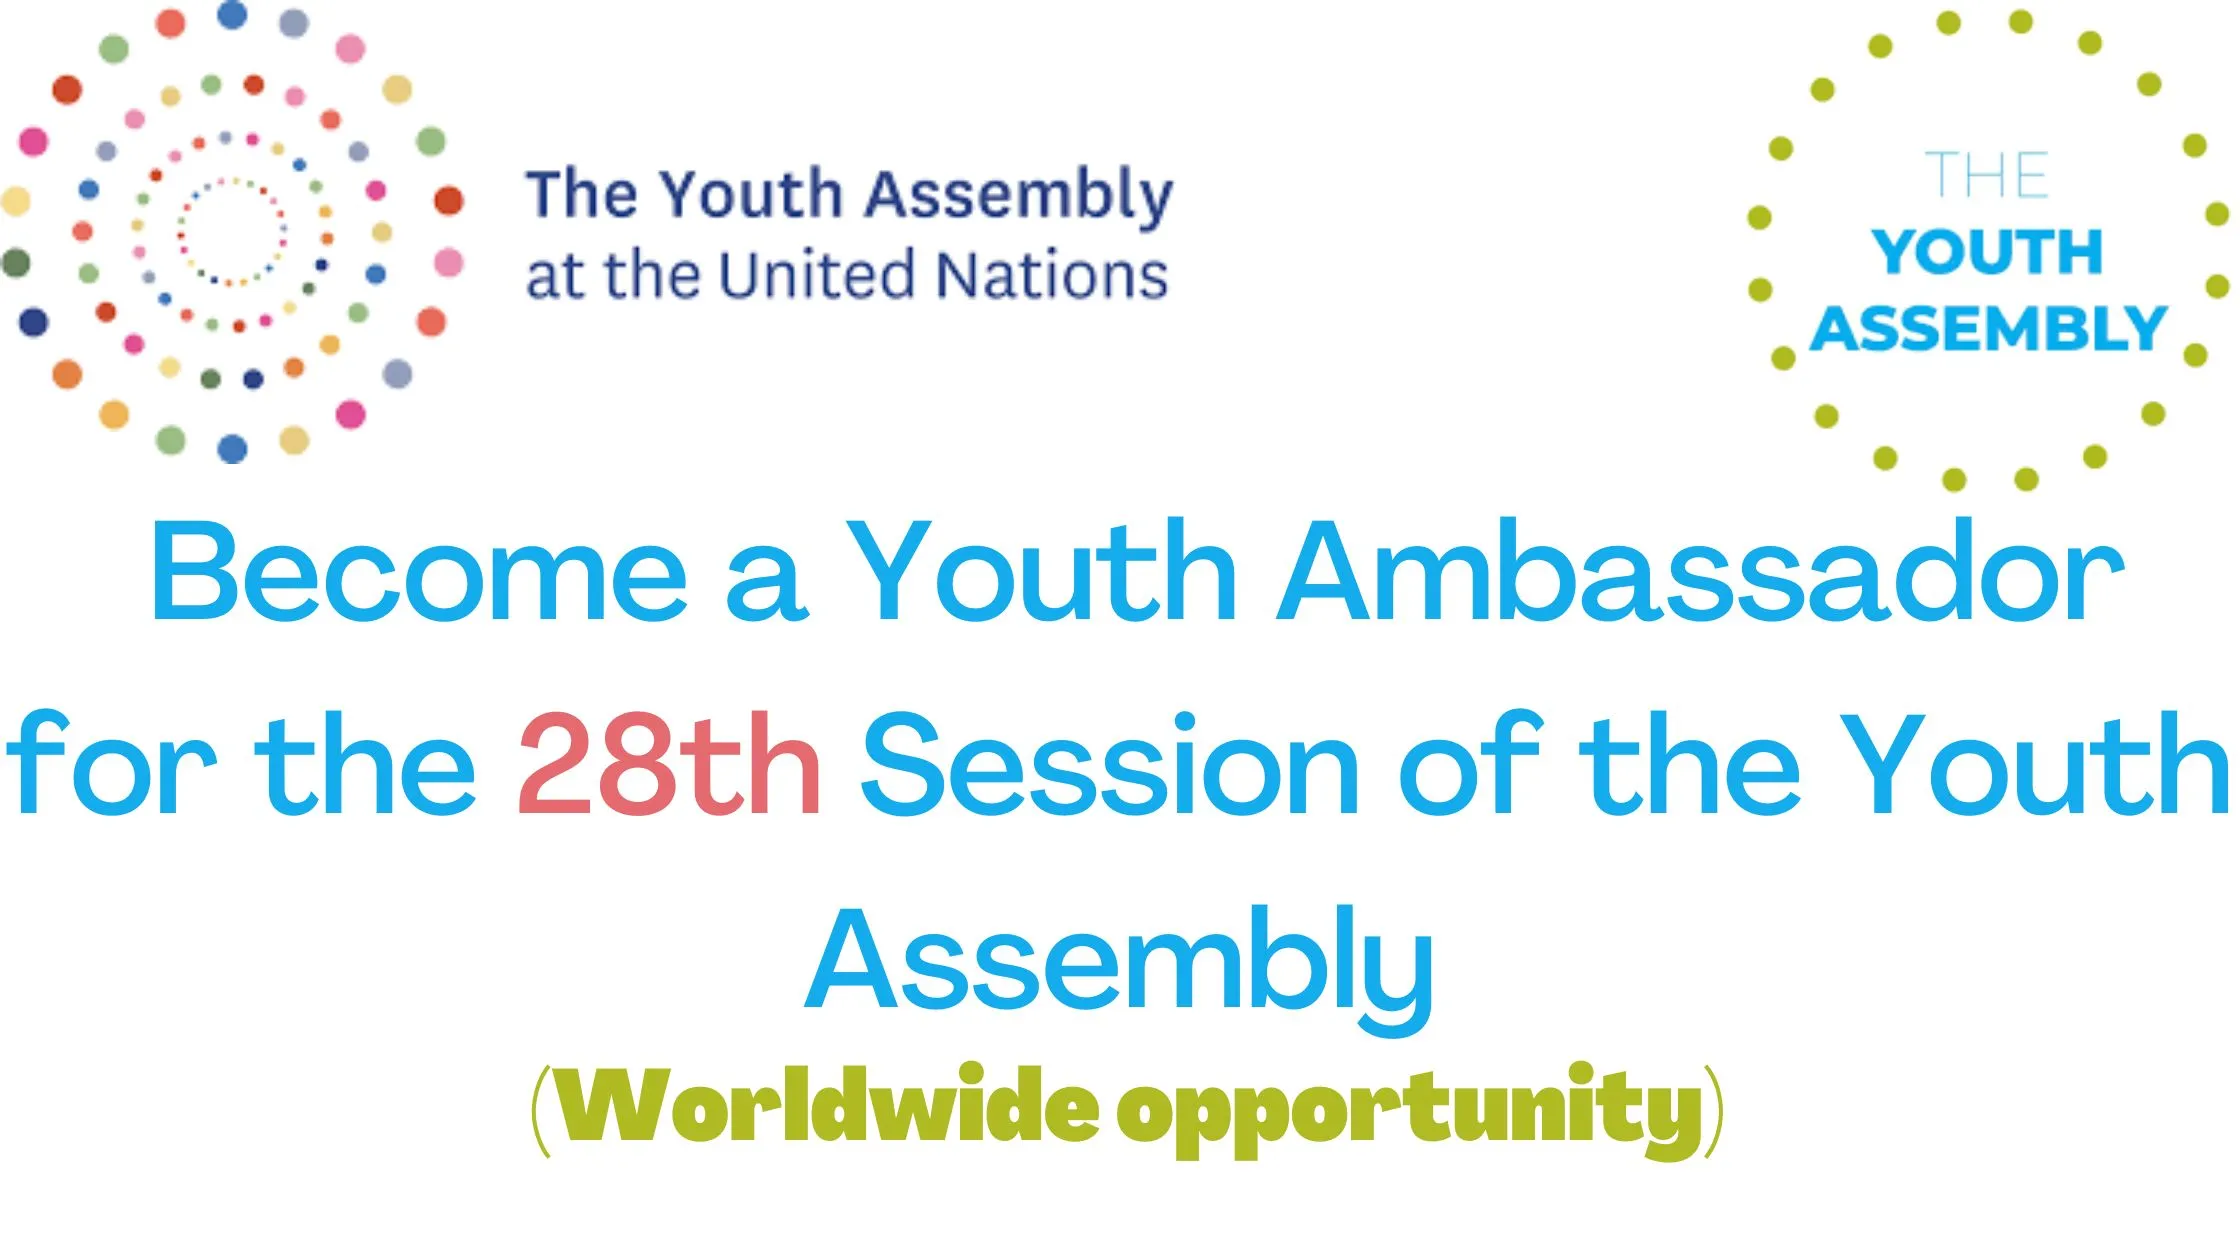 Become a Youth Ambassador for the 28th Session of the Youth Assembly (Worldwide opportunity)